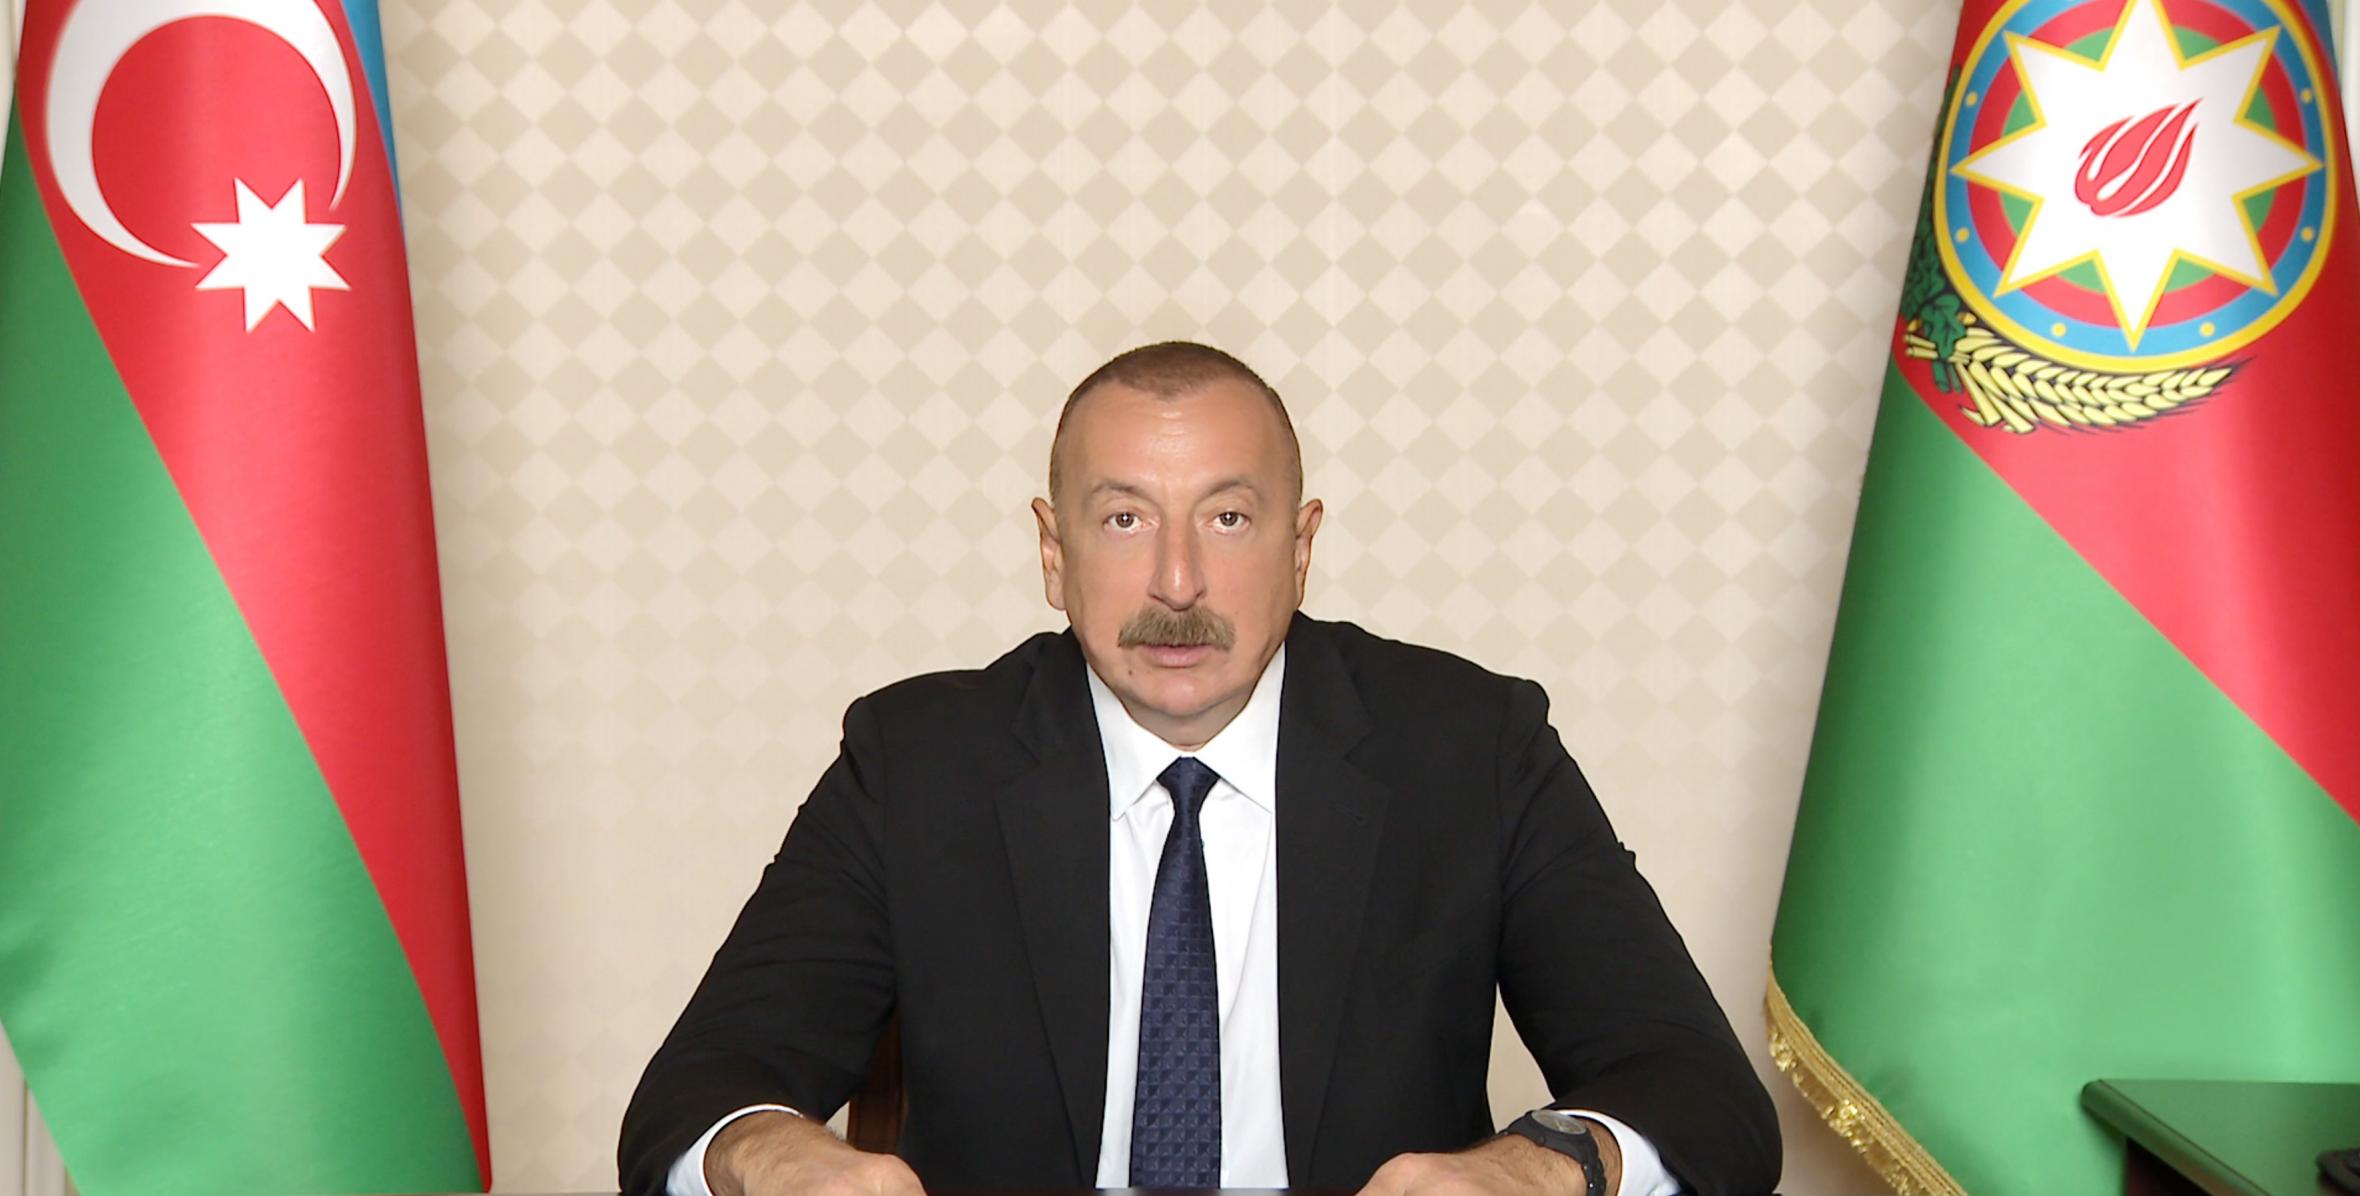 Ilham Aliyev presented in a video format at 74th session of World Health Assembly